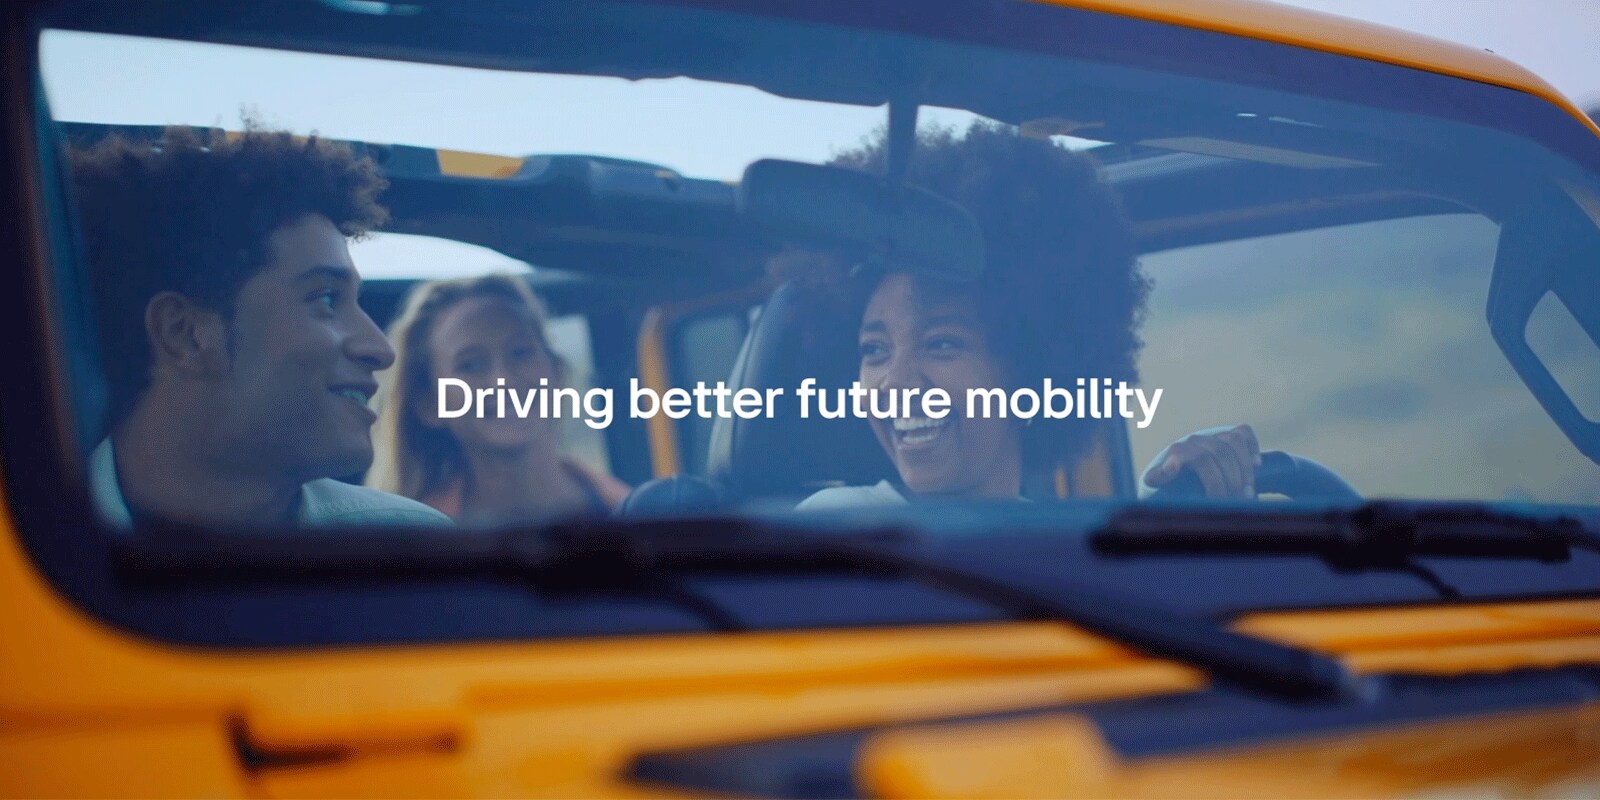 An image of a woman smiling happily while driving with her friends, with the words "Driving better future mobility" above it.